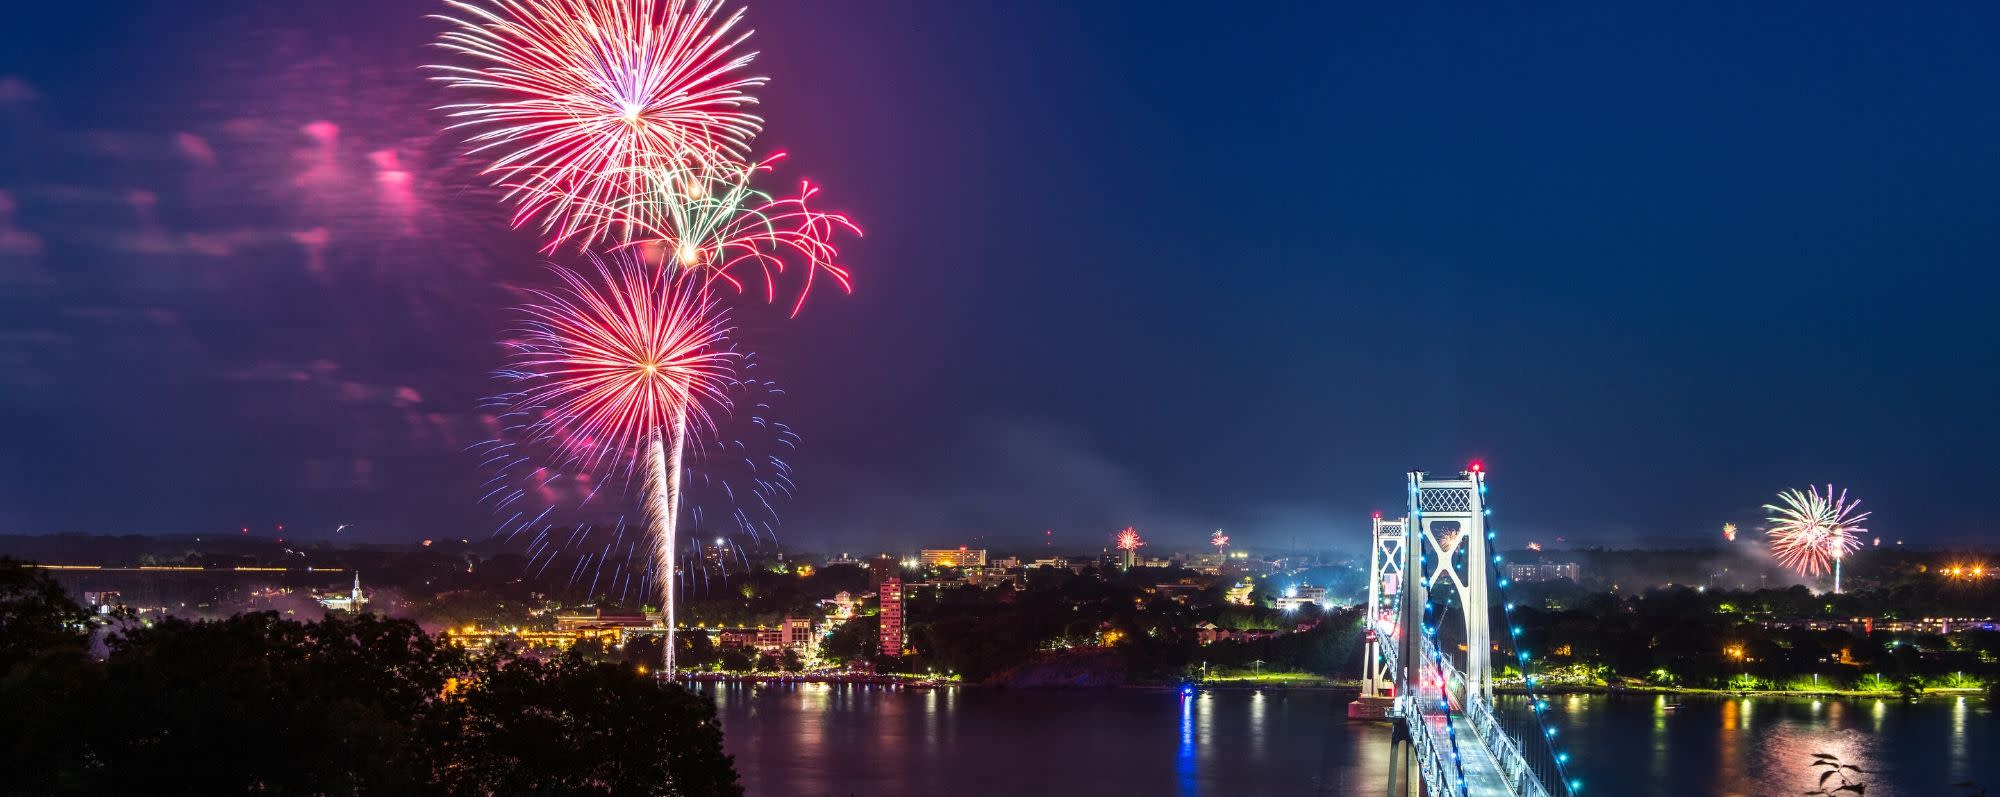 A photo of Independence Day fireworks between Mid Hudson Bridge and Walkway over the Hudson